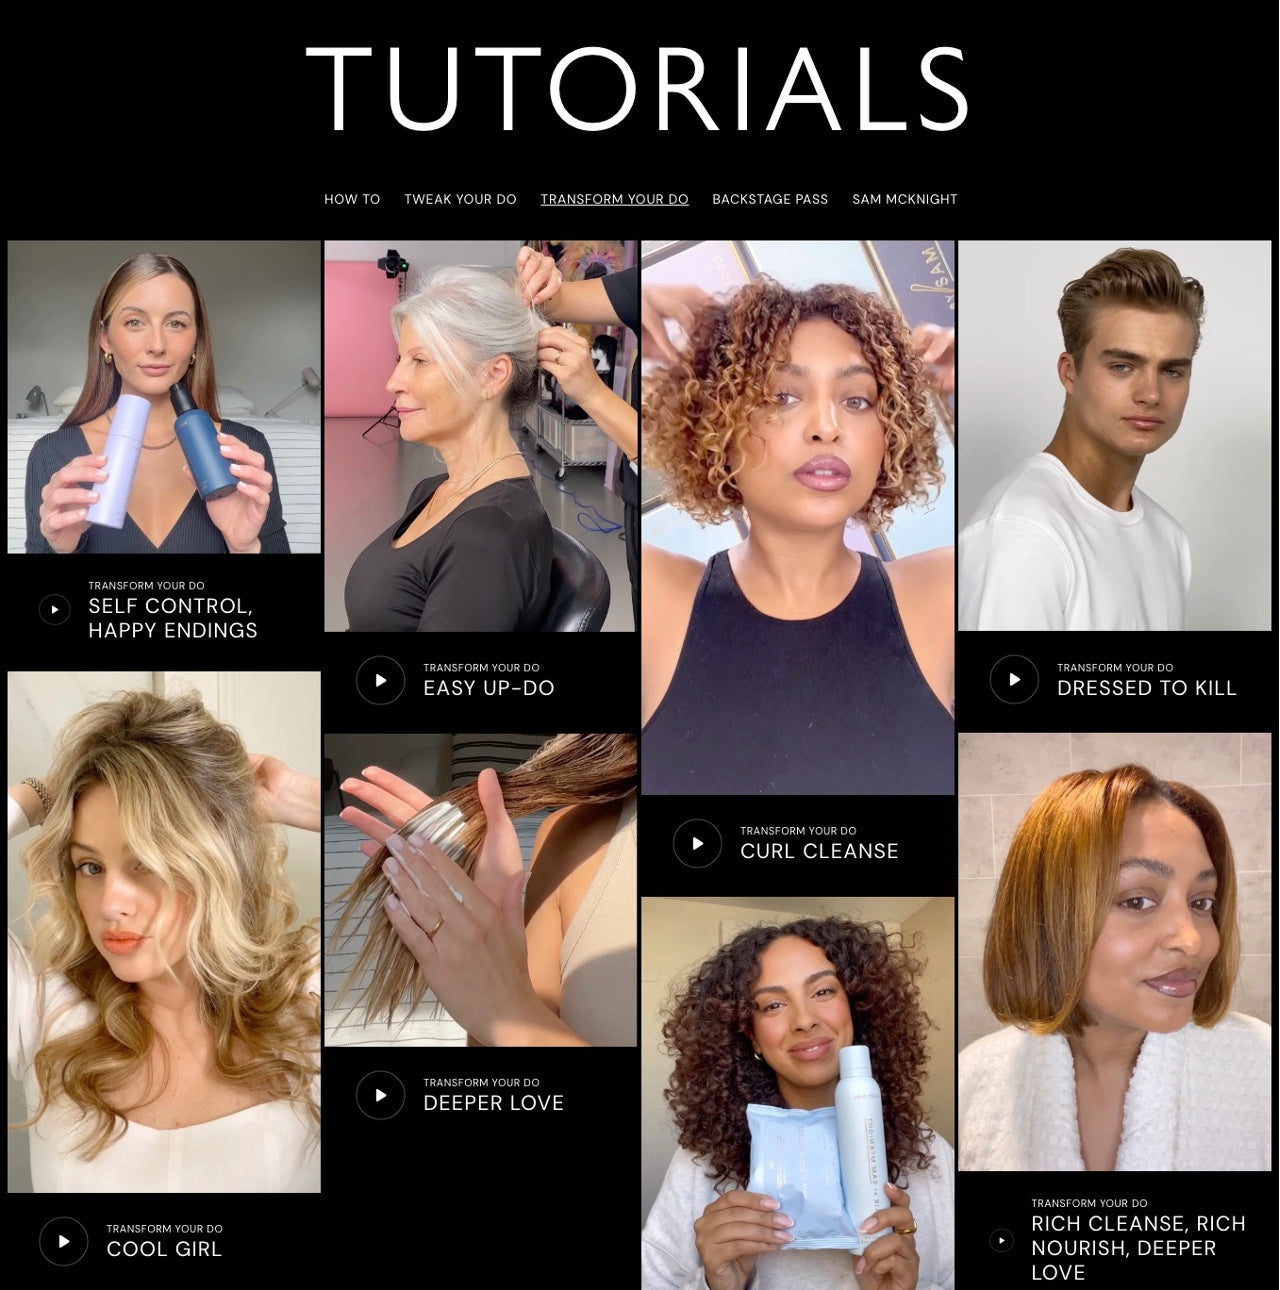 JUST LAUNCHED: TUTORIALS